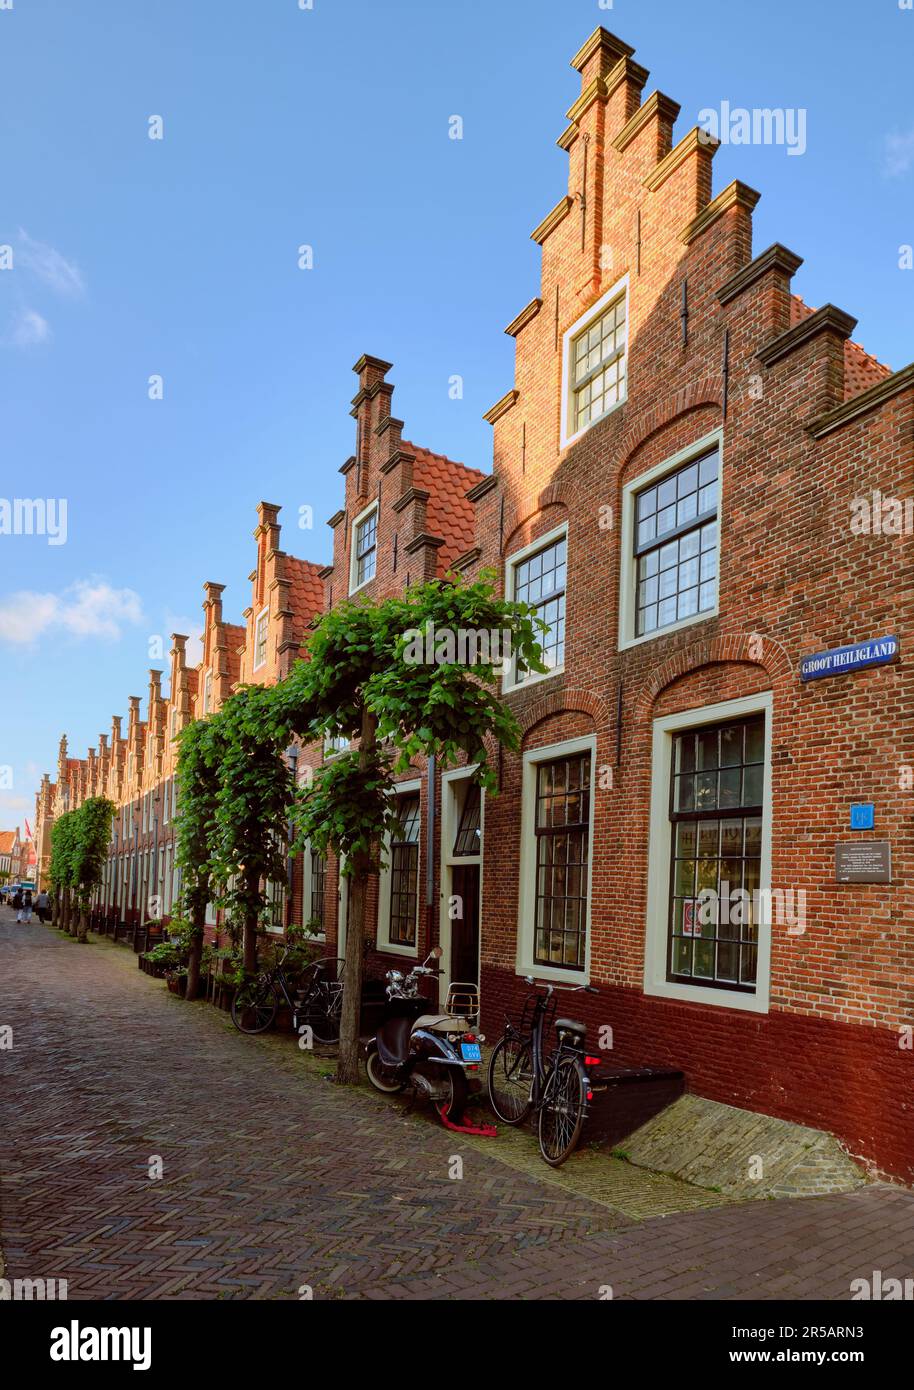 Haarlem, Netherlands - MAY 24, 2022: Row of houses with stepped gables in Groot Heiligland street in old town. Diminishing perpsective. Stock Photo